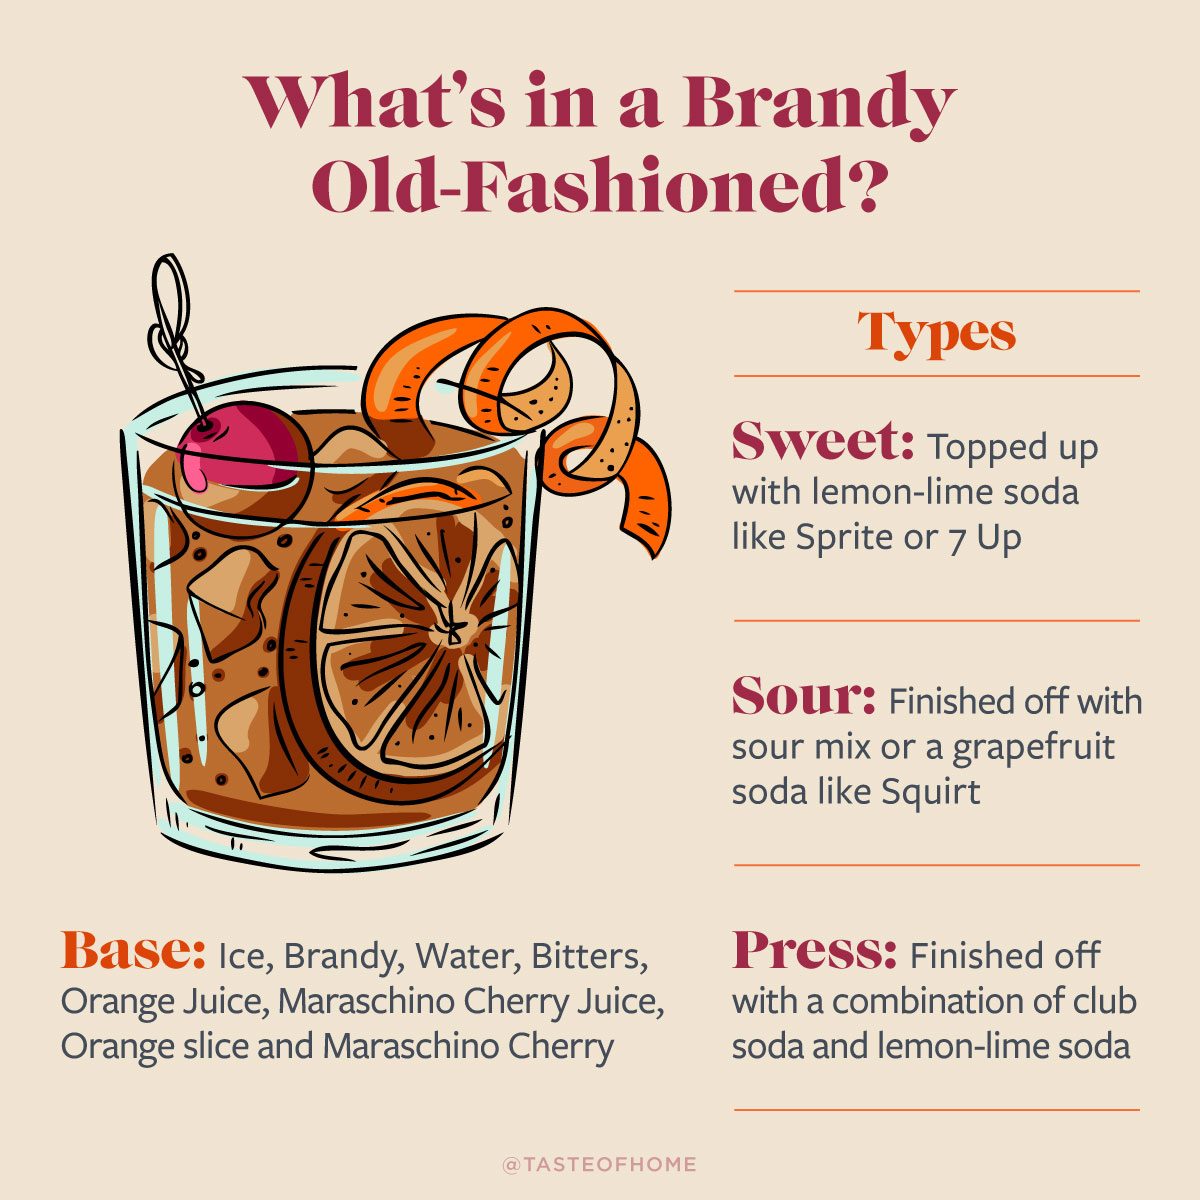 Brandy Old-Fashioned Sweet Recipe: How to Make It